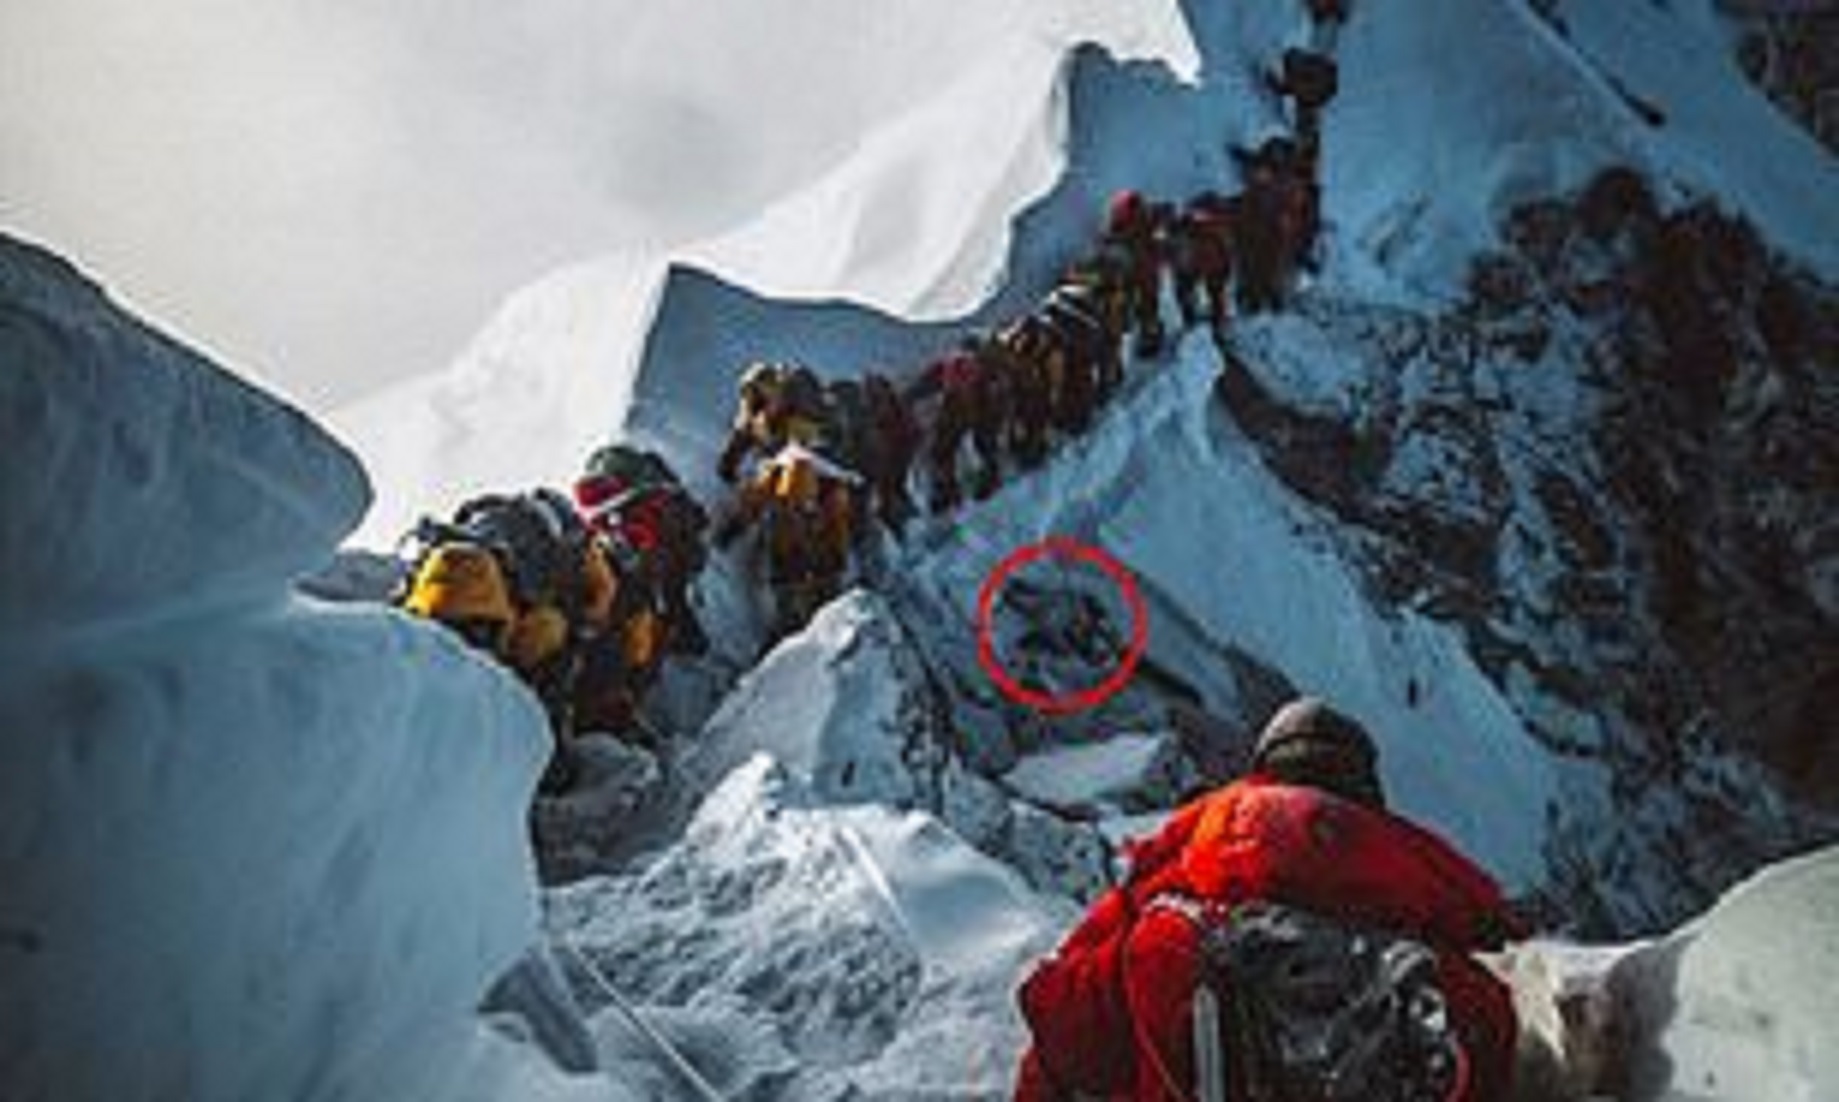 68 Climbers, A Record High In Single Day, Reach Top Of Mt. Annapurna